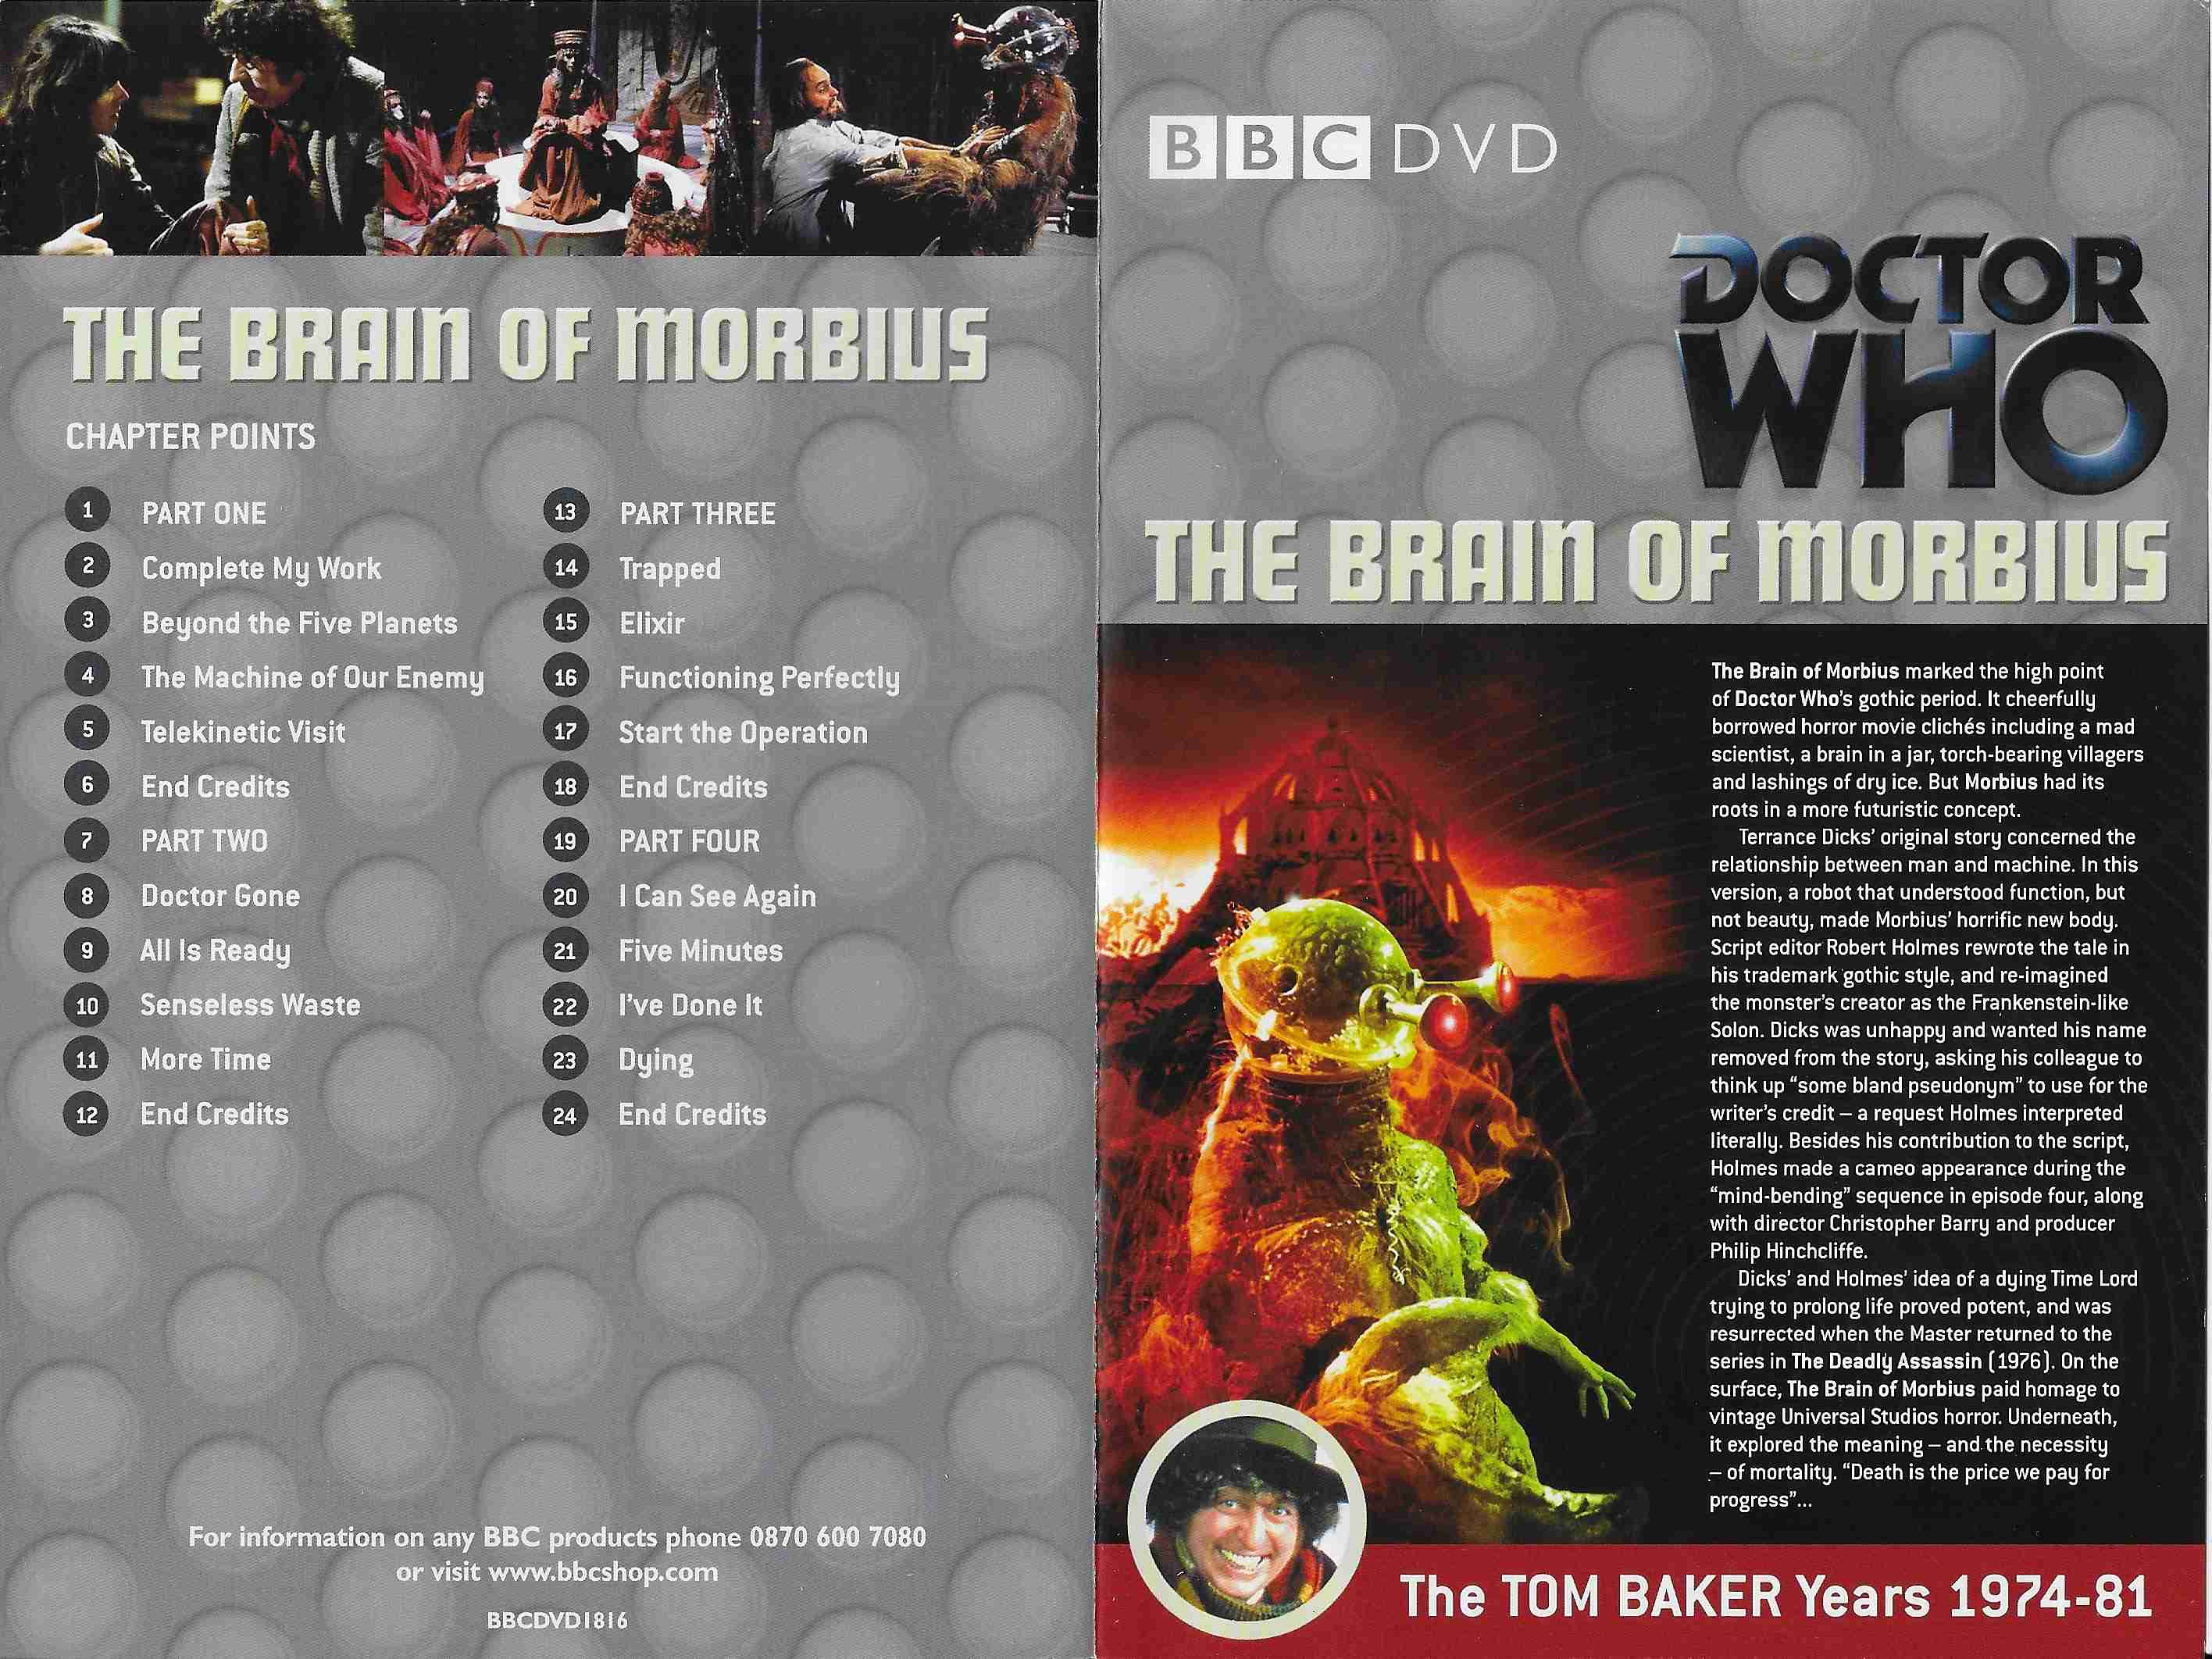 Picture of BBCDVD 1816 Doctor Who - The brain of Morbius by artist Robin Bland from the BBC records and Tapes library